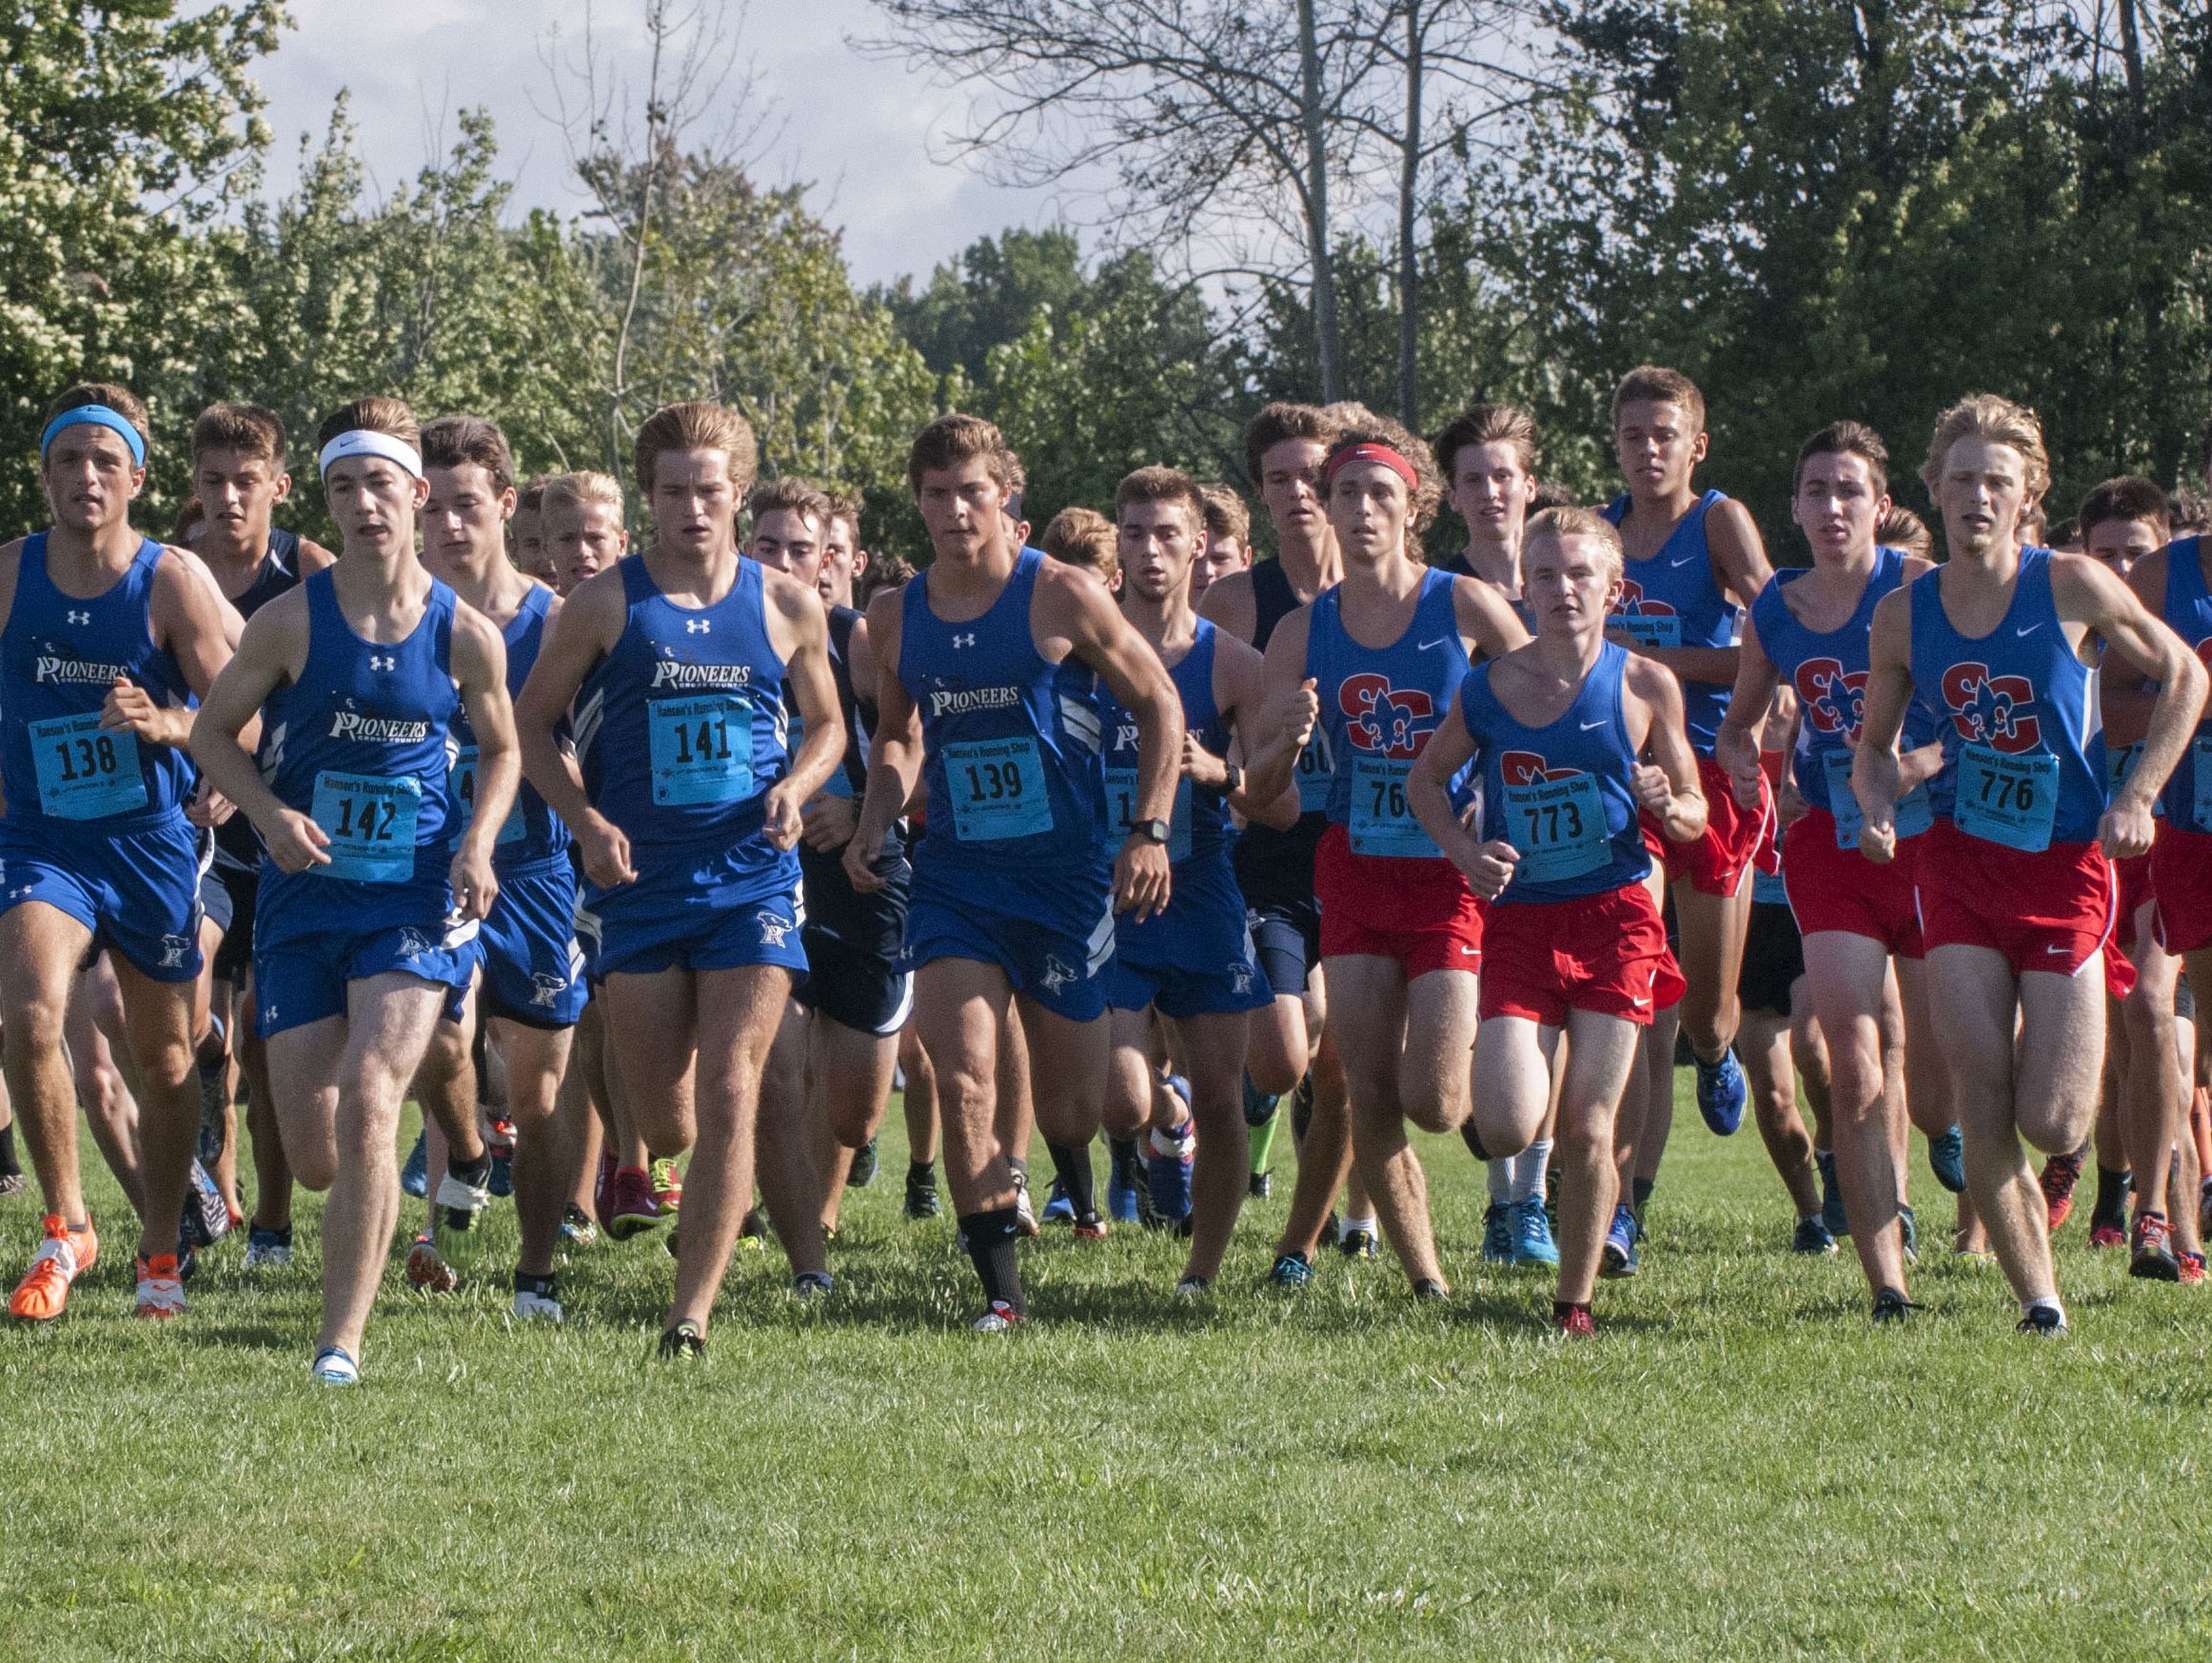 CrosLex and St. Clair runners lead the beginning of the Division 2-3-4 race Saturday, Sept. 10 at the Algonac Muskrat Cross Country Classic at Algonac High School.